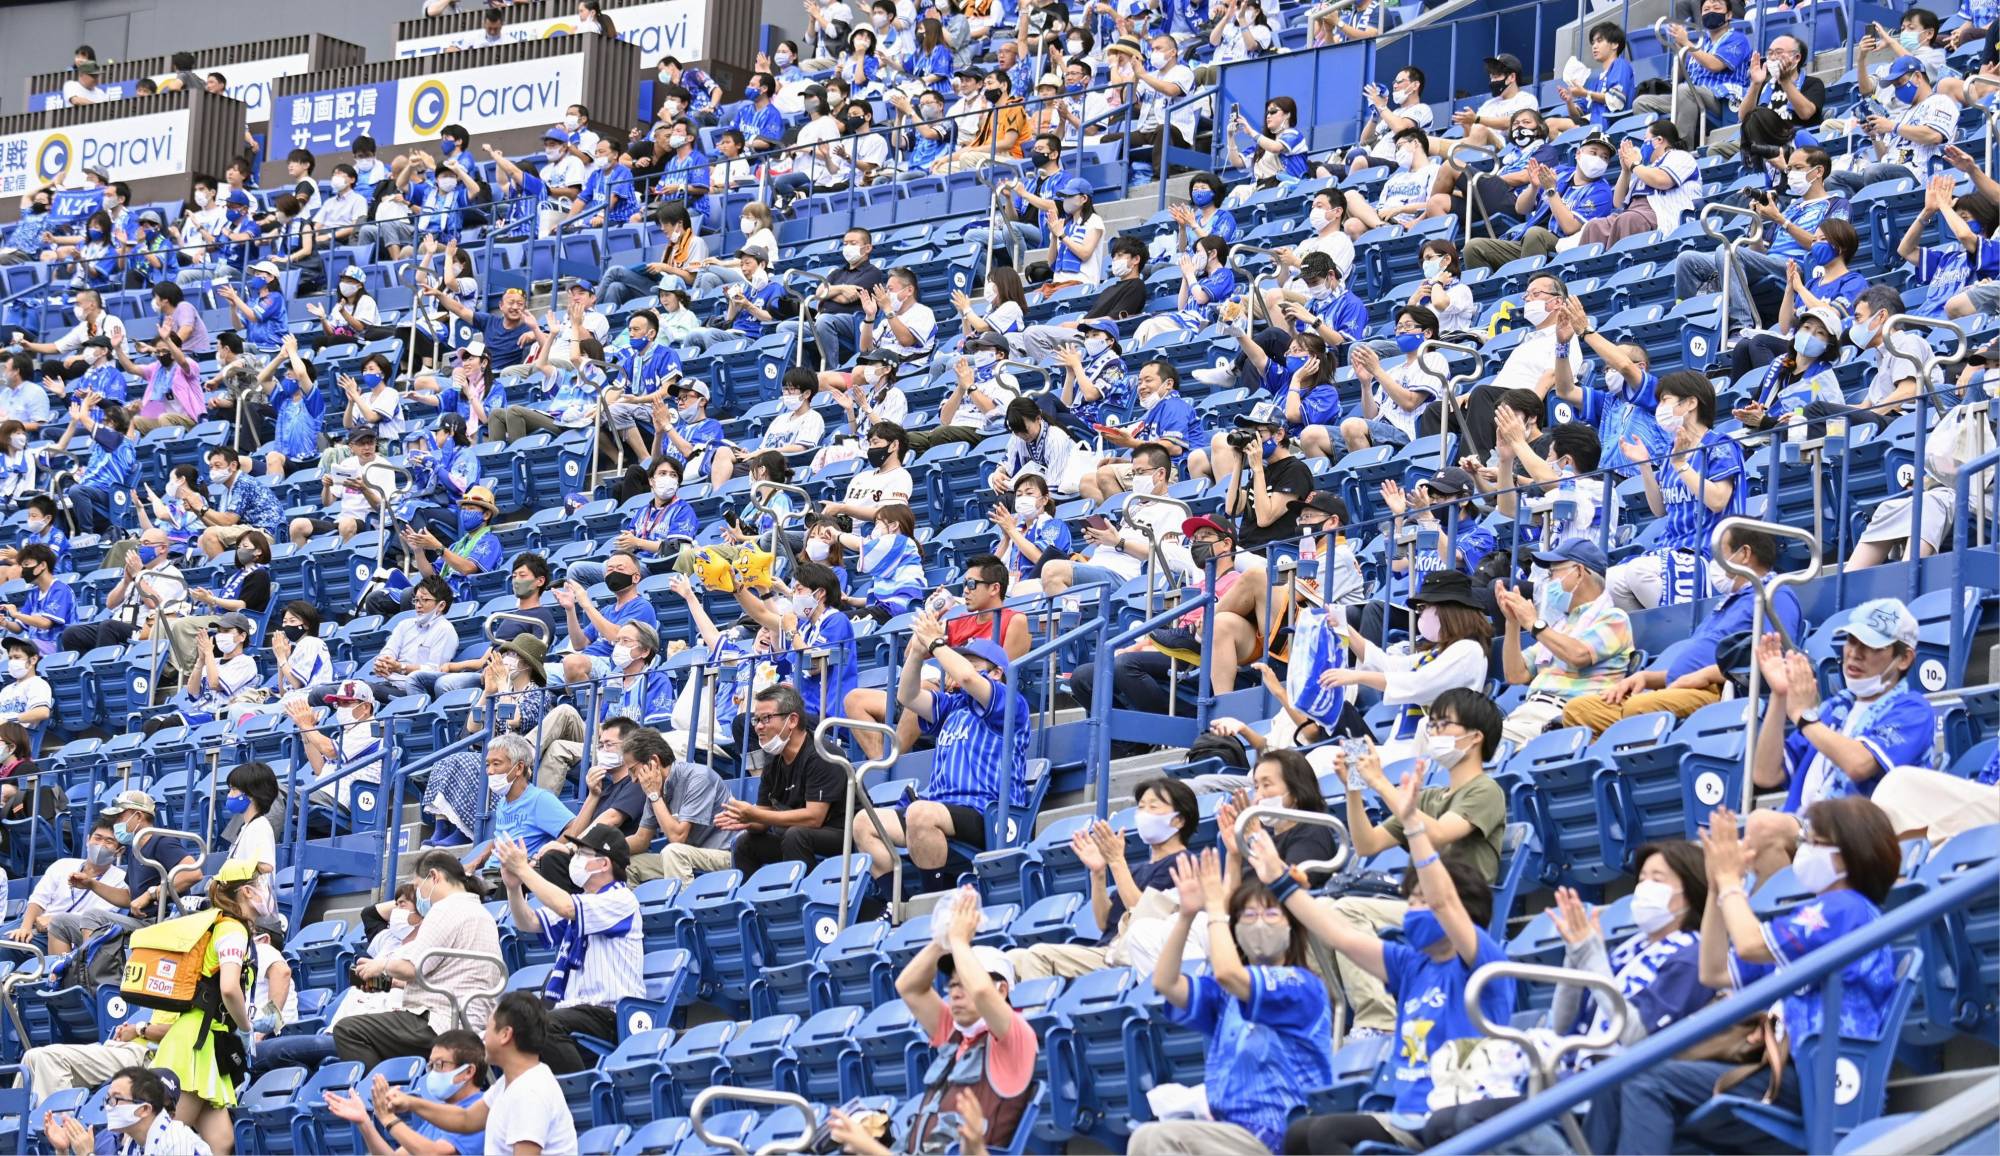 A three-day trial will be held at Yokohama Stadium from Oct. 30, with the stadium filled to 80% of its full 34,000-spectator capacity. | KYODO